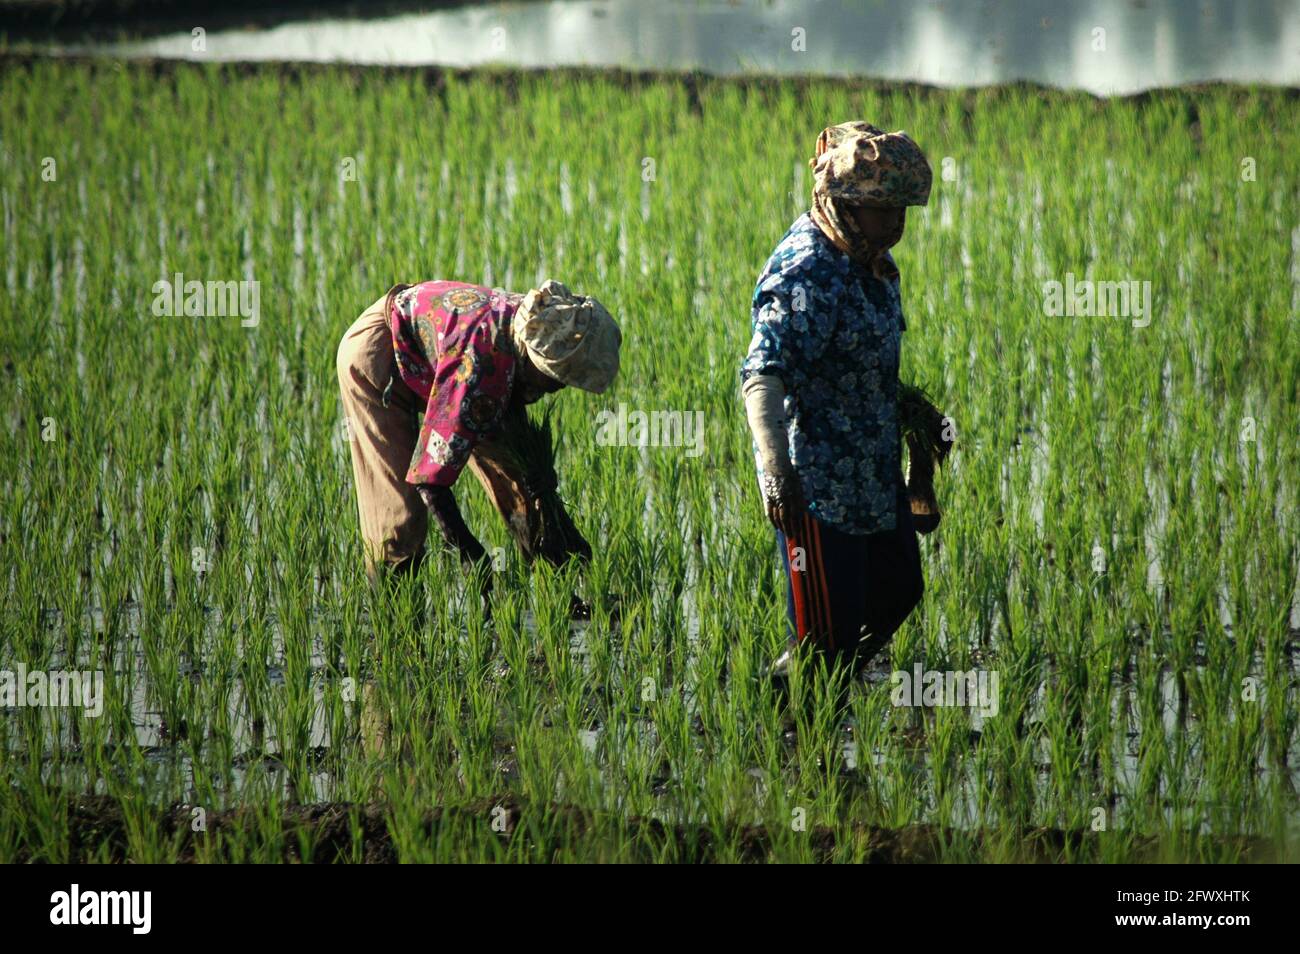 Women farmers working on rice field in Bandung, West Java, Indonesia. Rice production is particularly vulnerable to climate change as global changes in El Nino patterns are likely to impact the onset and length of the wet season, according to a scientific document focusing on climate risks, which was recently released by The World Bank Group and Asian Development Bank. 'Higher temperatures are also projected to reduce rice crop yields. Alongside other impacts on agricultural production, Indonesia faces multiple threats to its food security,' the report said. Stock Photo